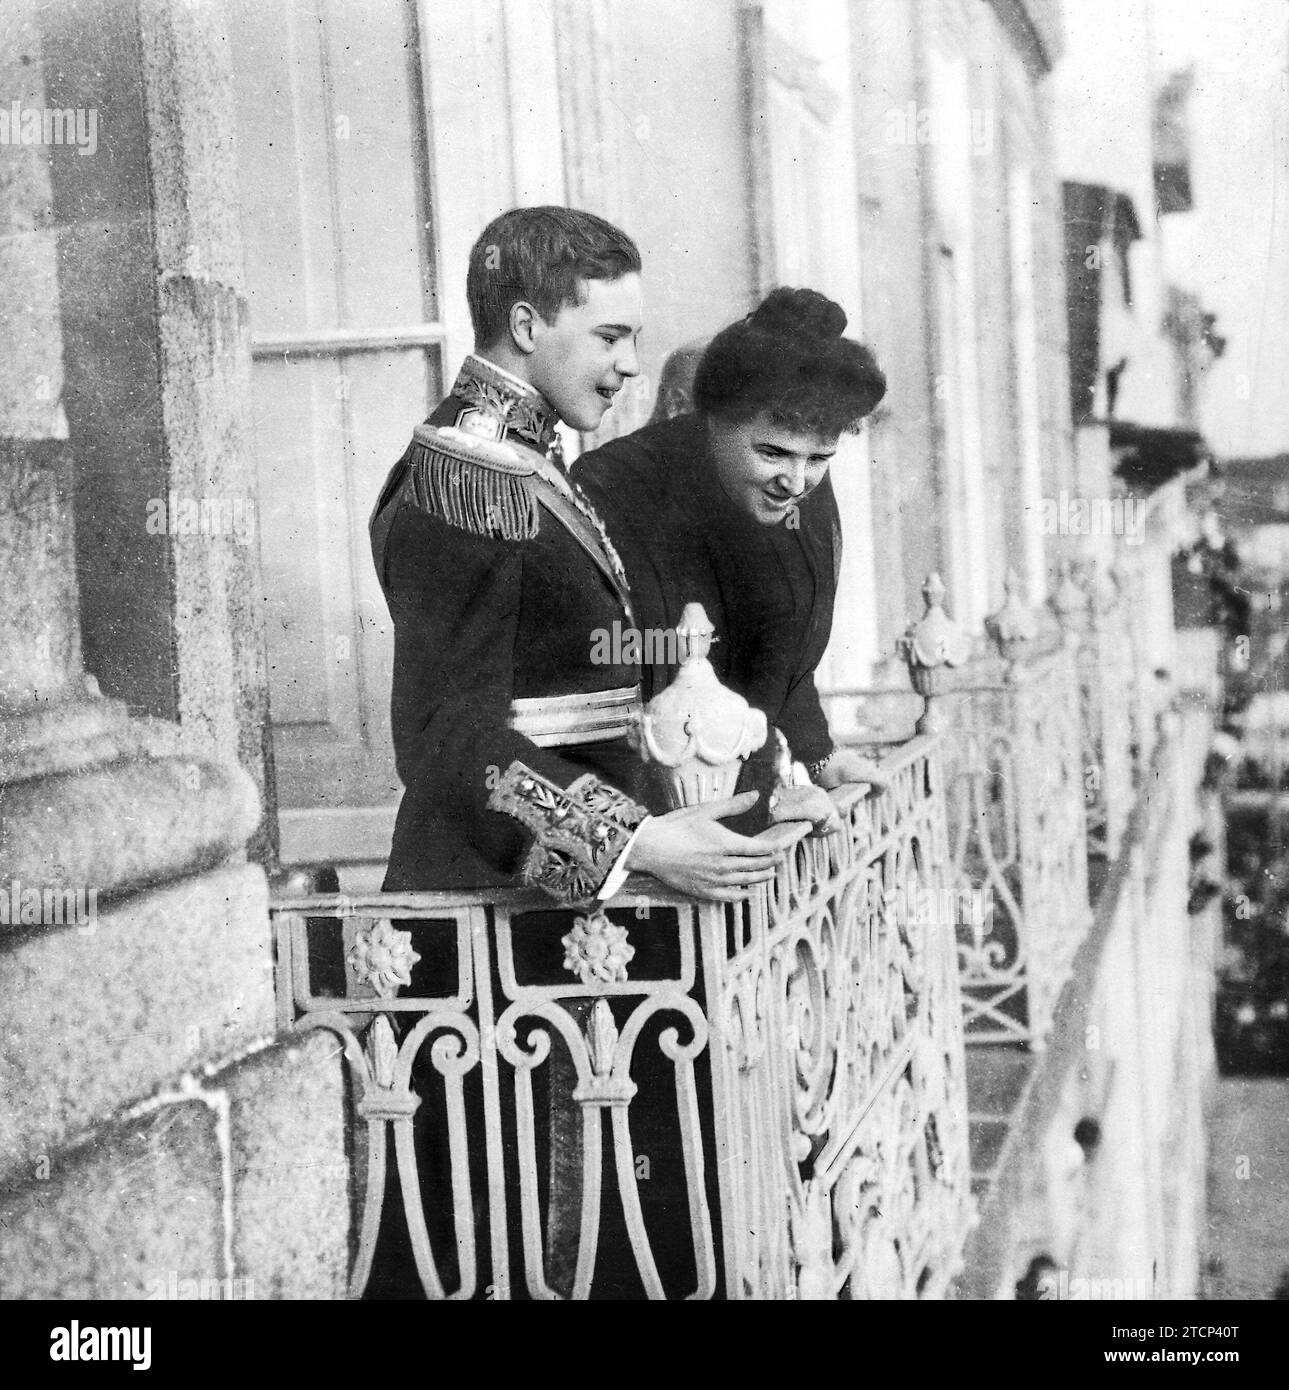 12/31/1908. Dª Amelia, queen mother, and D. Manuel II of Portugal, looking out from a balcony. Credit: Album / Archivo ABC / Joshua Benoliel Stock Photo